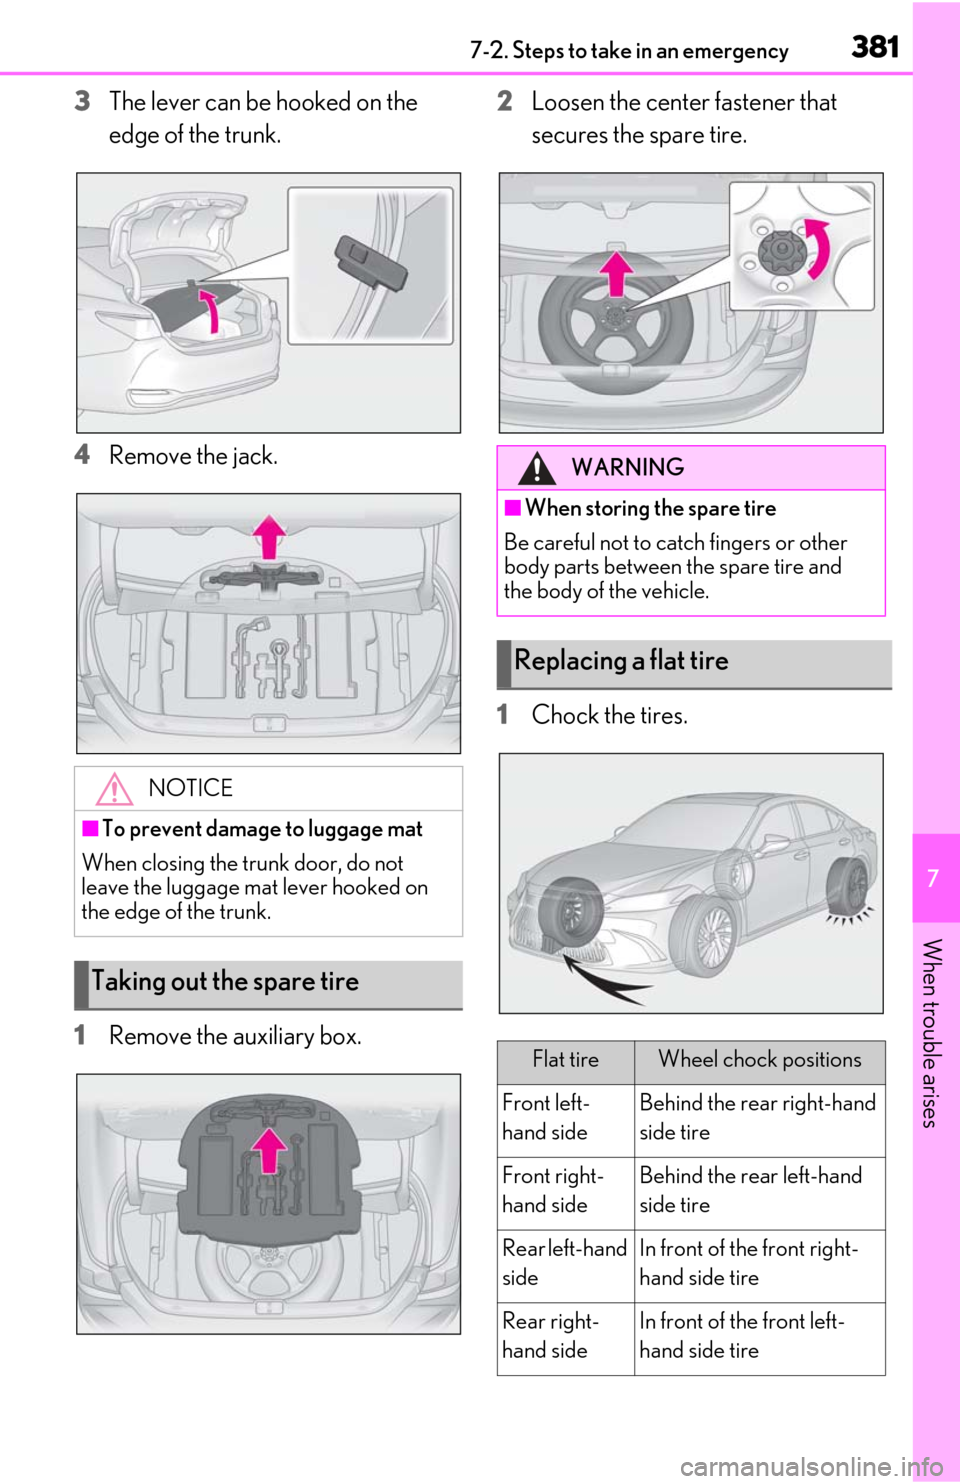 Lexus ES300h 2020  Owners Manual (OM06196U) 3817-2. Steps to take in an emergency
7
When trouble arises
3The lever can be hooked on the 
edge of the trunk.
4
Remove the jack.
1
Remove the auxiliary box. 2
Loosen the center fastener that 
secure